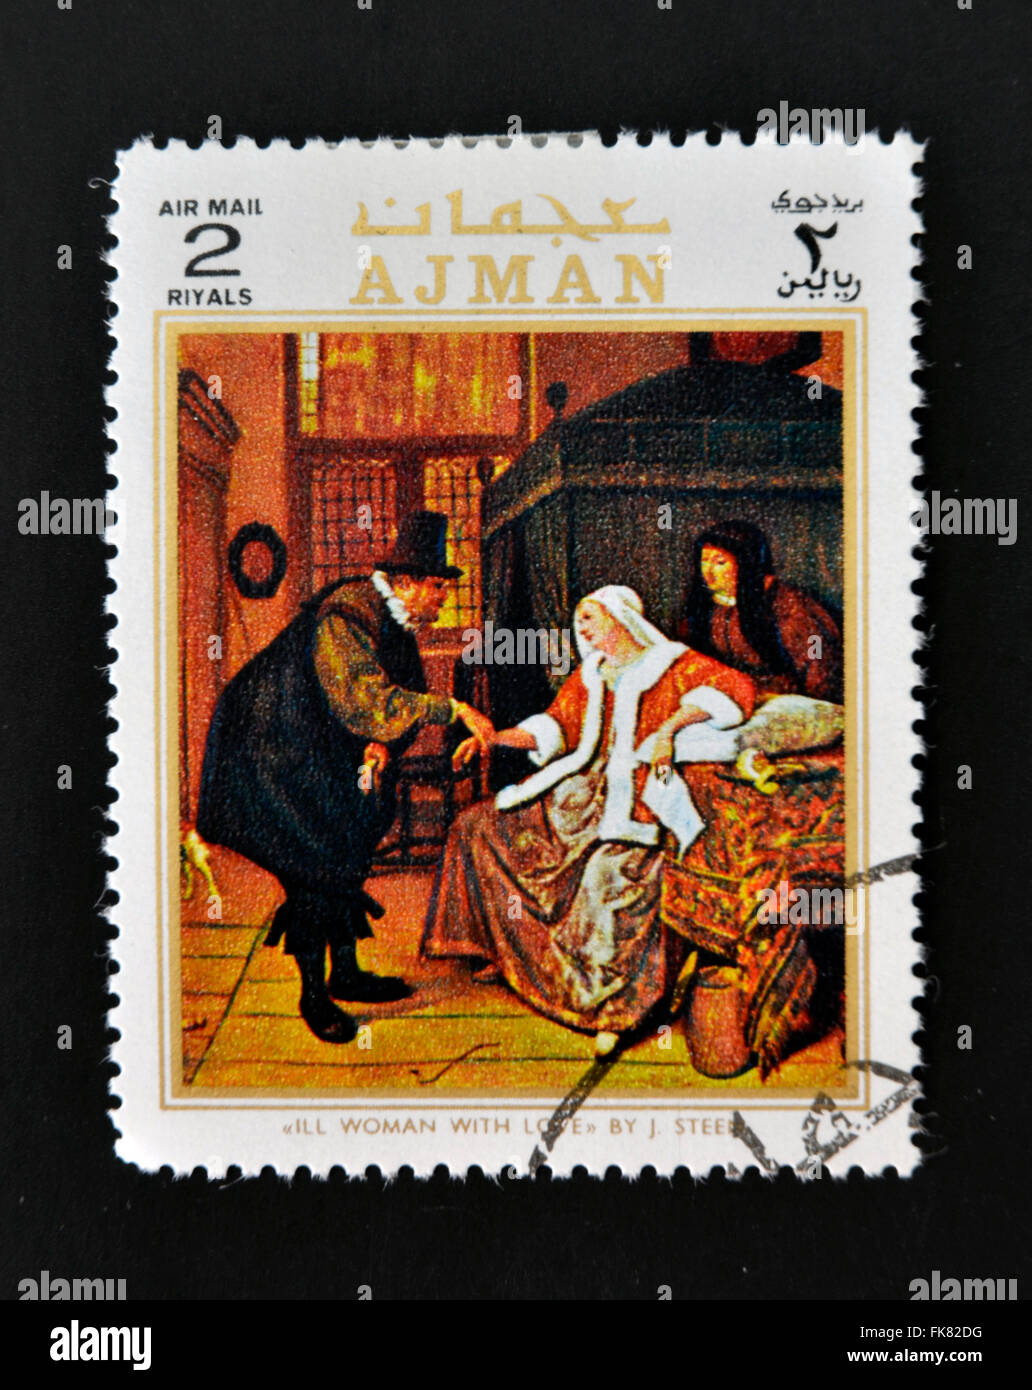 AJMAN - CIRCA 1970: A stamp printed in Ajman shows Ill woman with love by Steen, circa 1970 Stock Photo